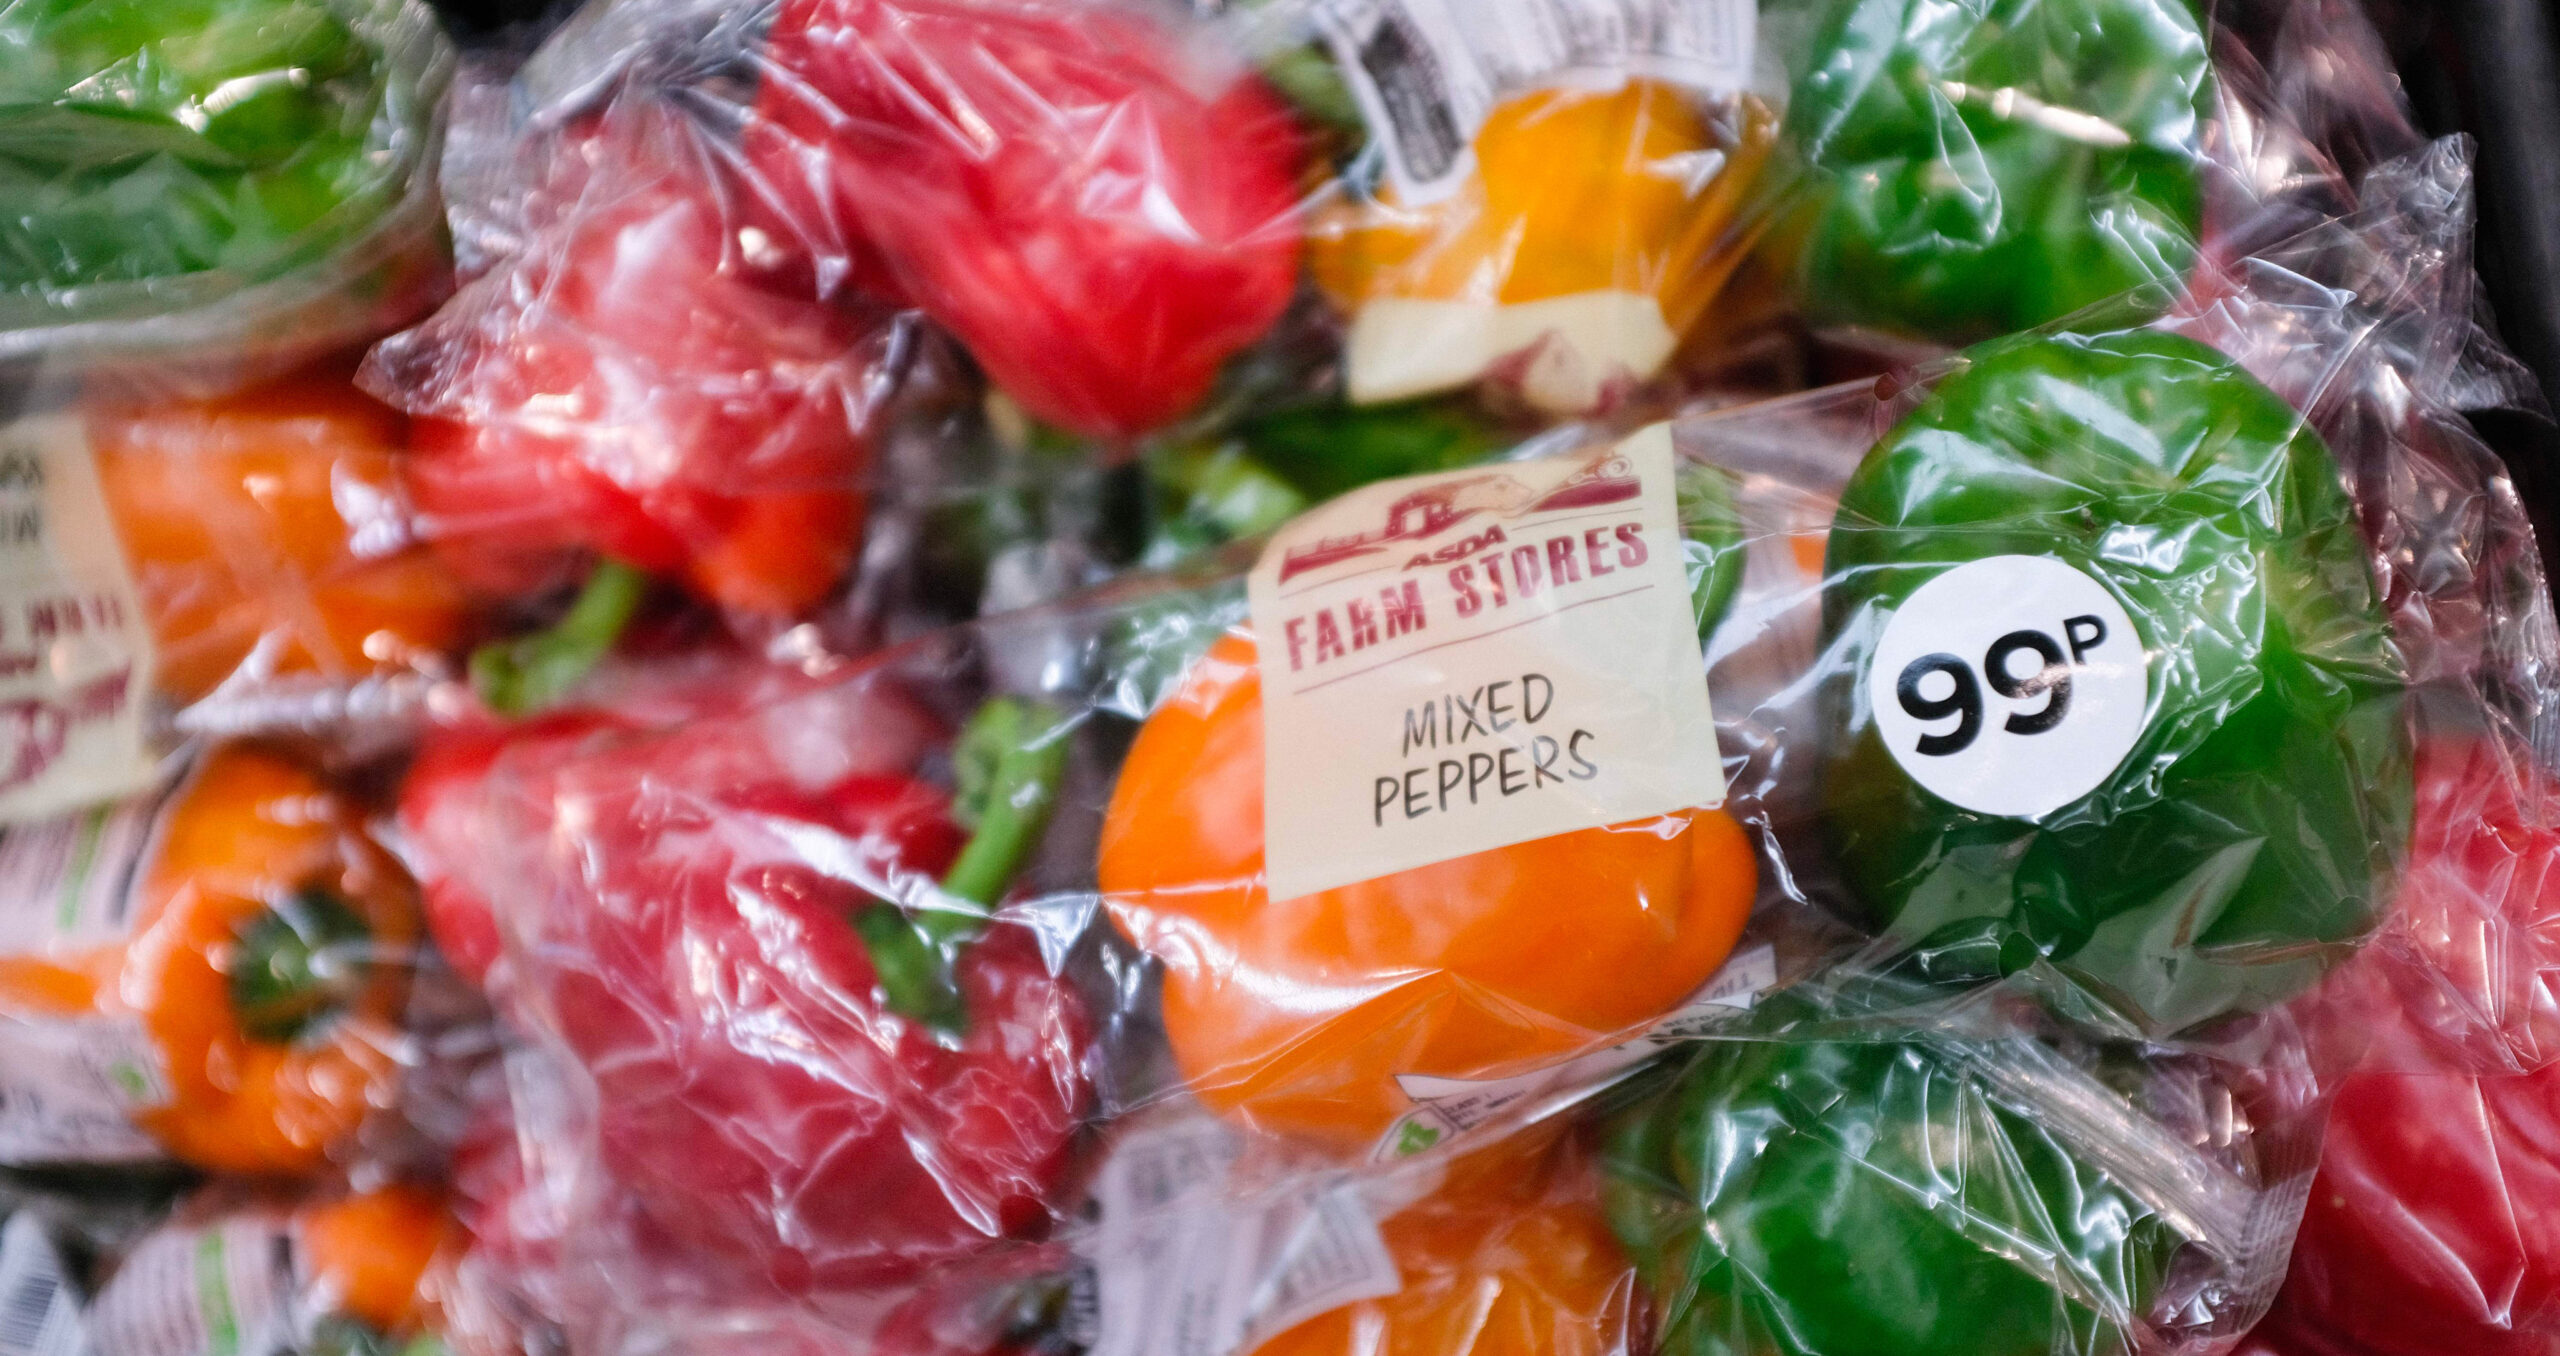 The EU vote ‘undermines the objectives of the regulation without offering any credible solutions to reduce packaging waste’, according to the European Environmental Bureau (Photo: Daniel Leal/AFP via Getty Images) 